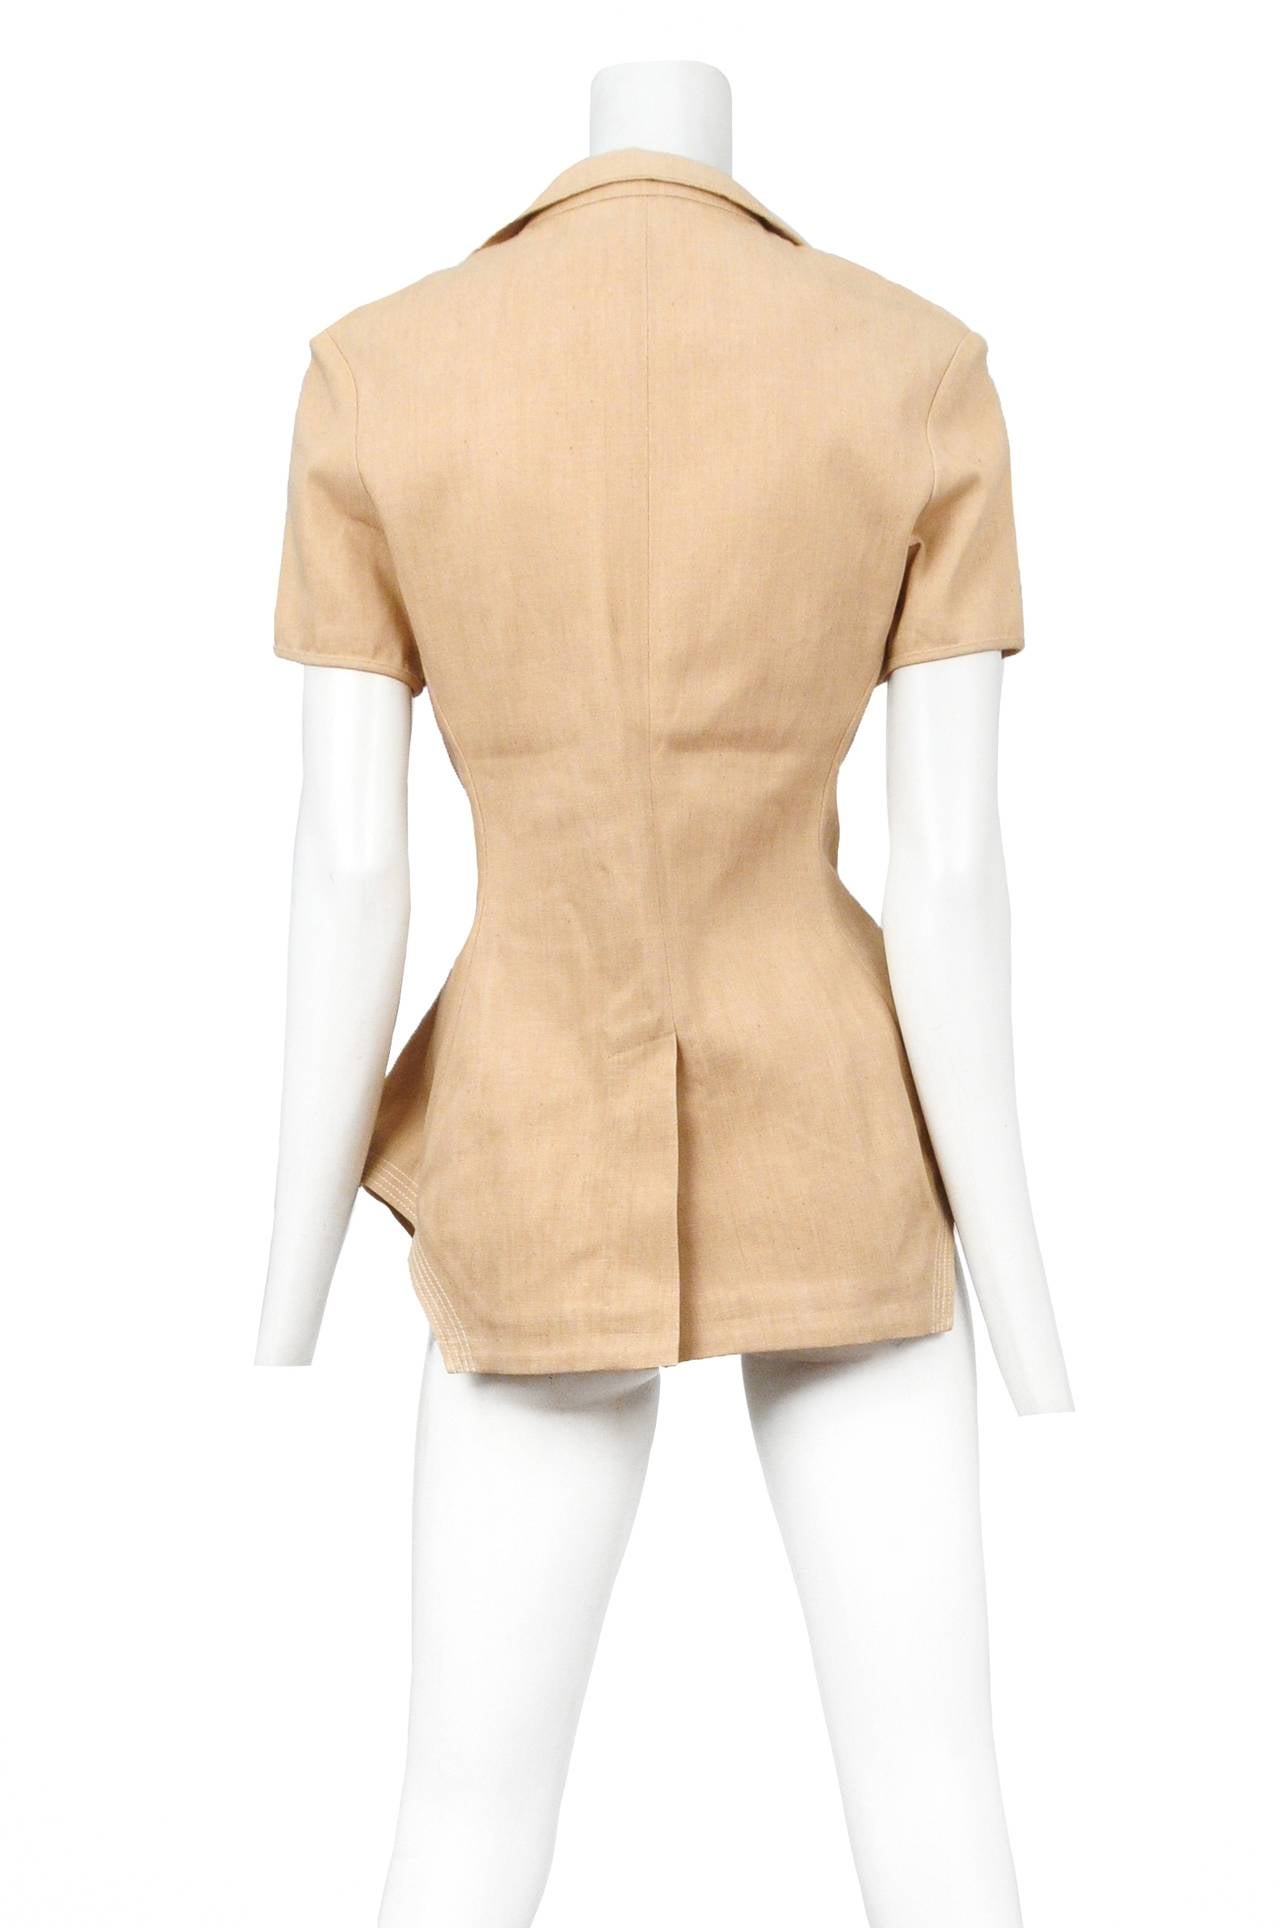 Vintage Yohji Yamamoto natural colored short sleeve architectural top featuring a flap collar, back vent and hidden lace inserts at the bust.